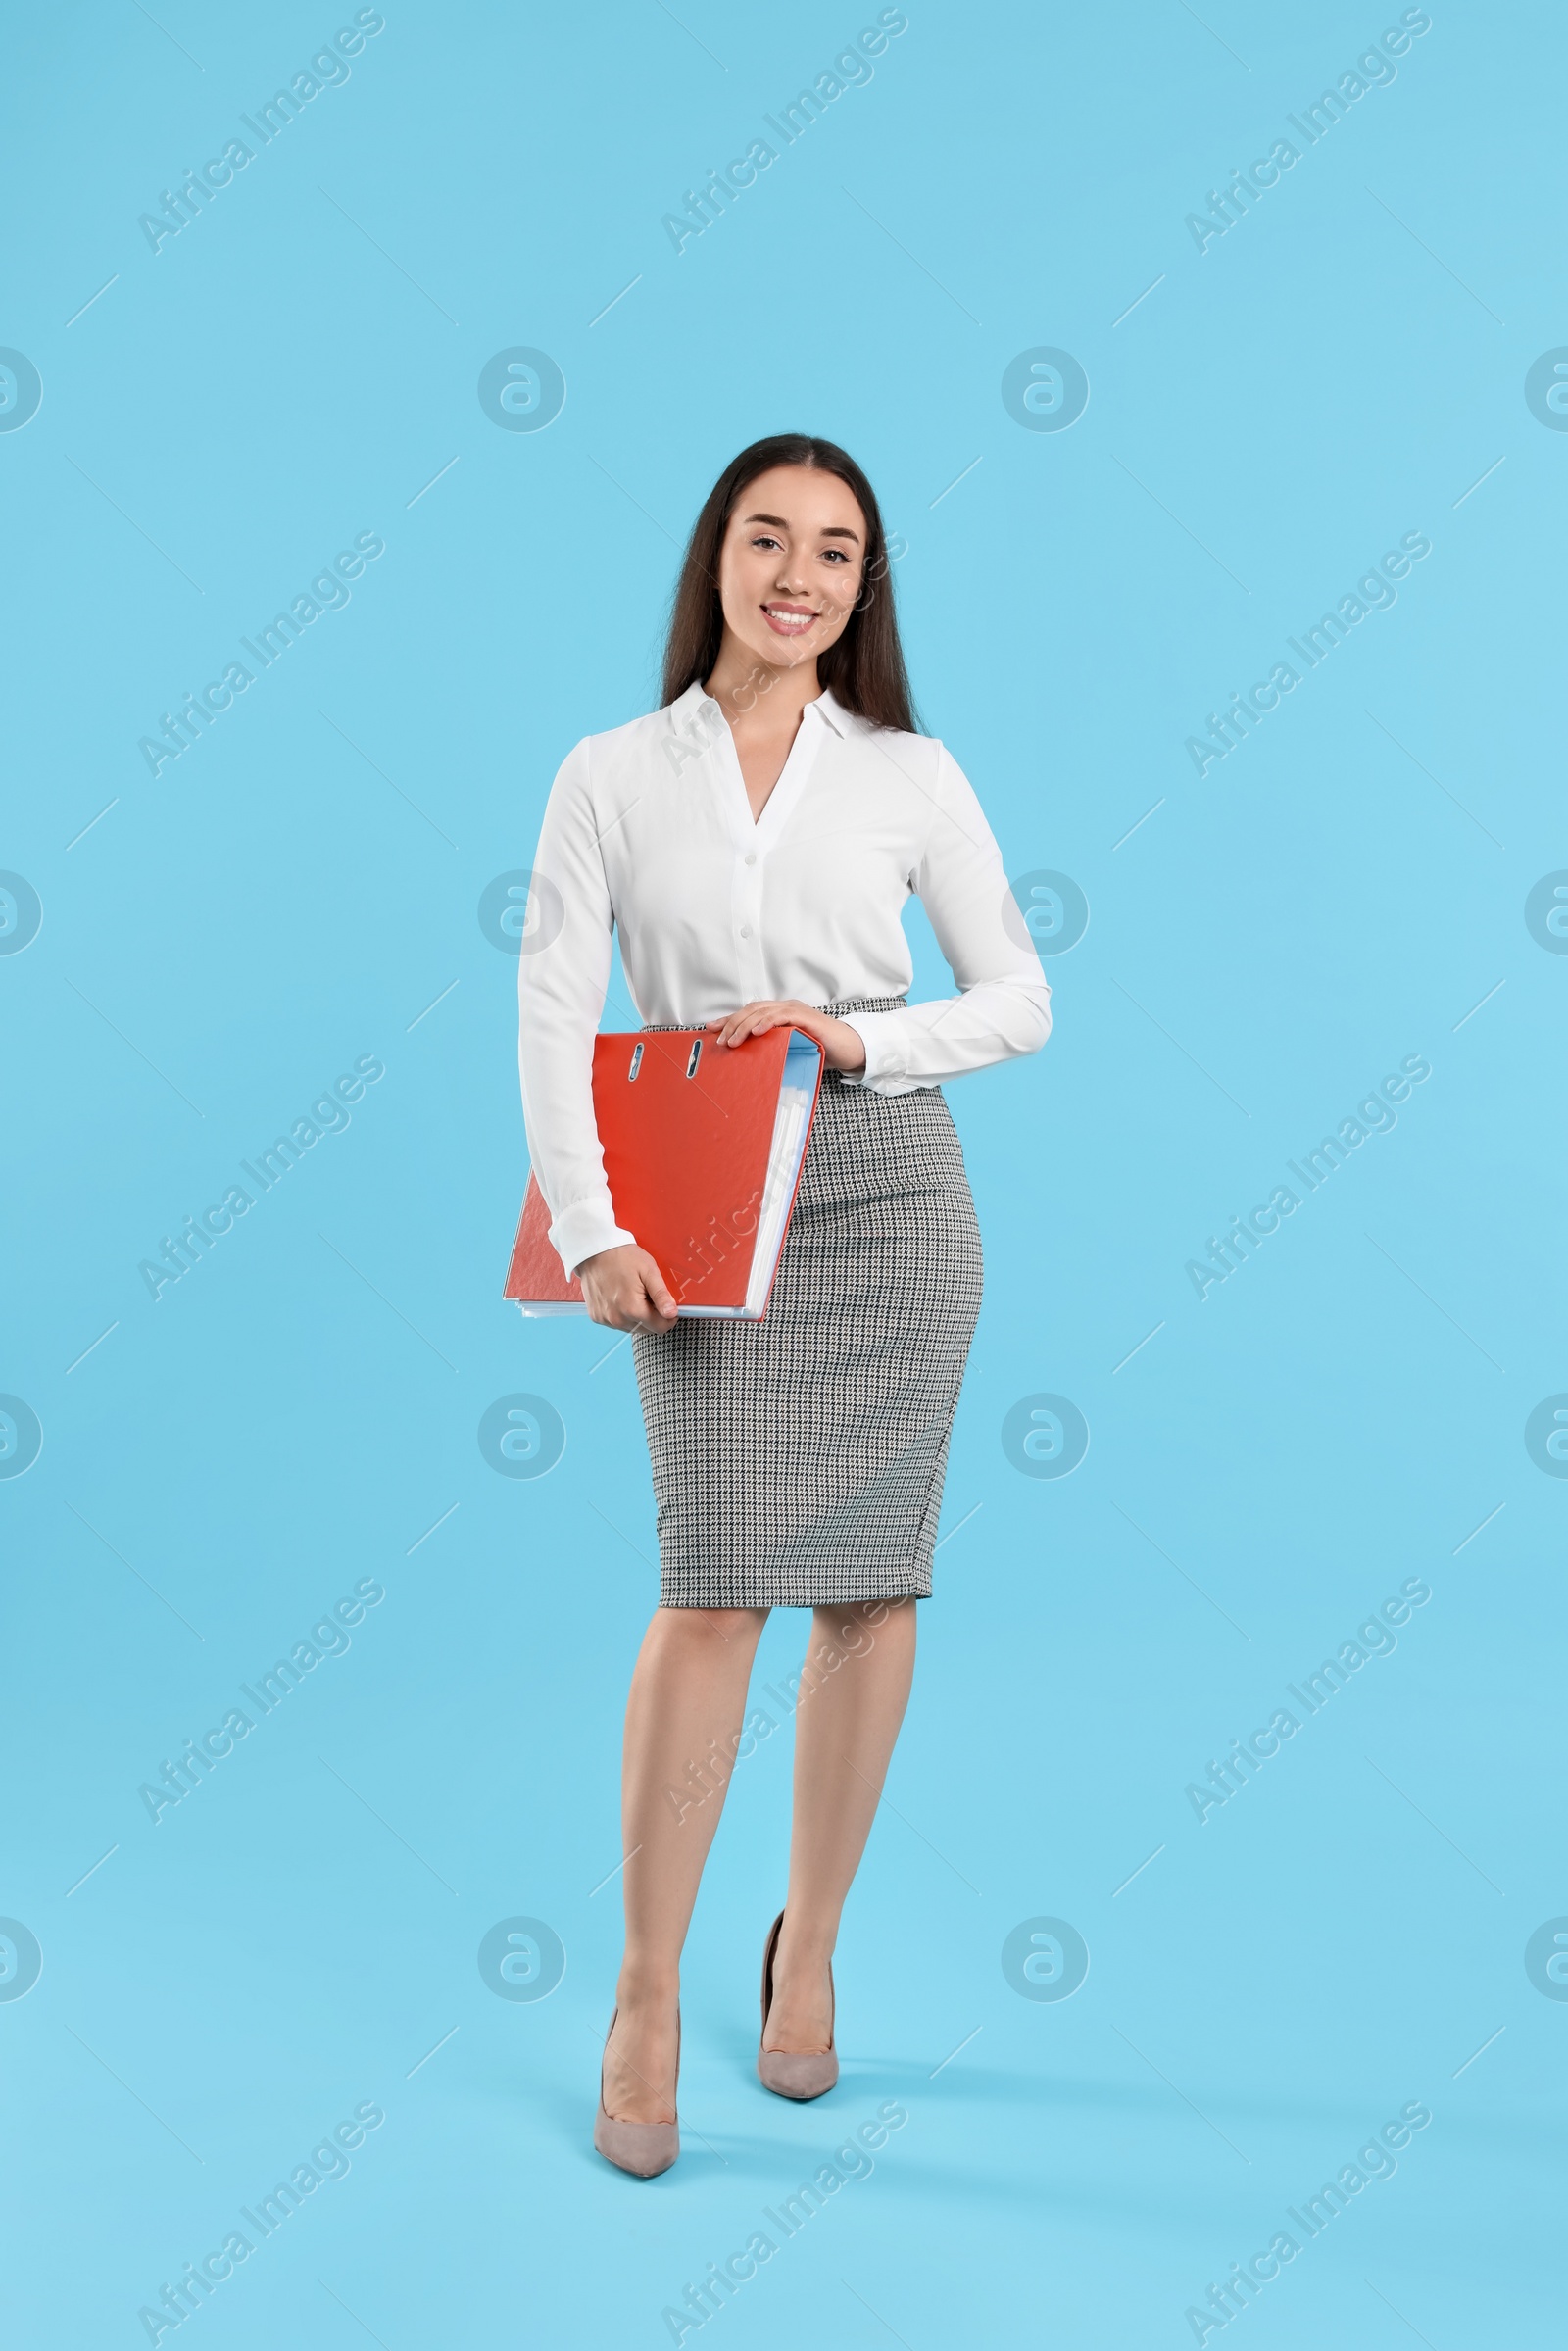 Photo of Happy woman with folder on light blue background